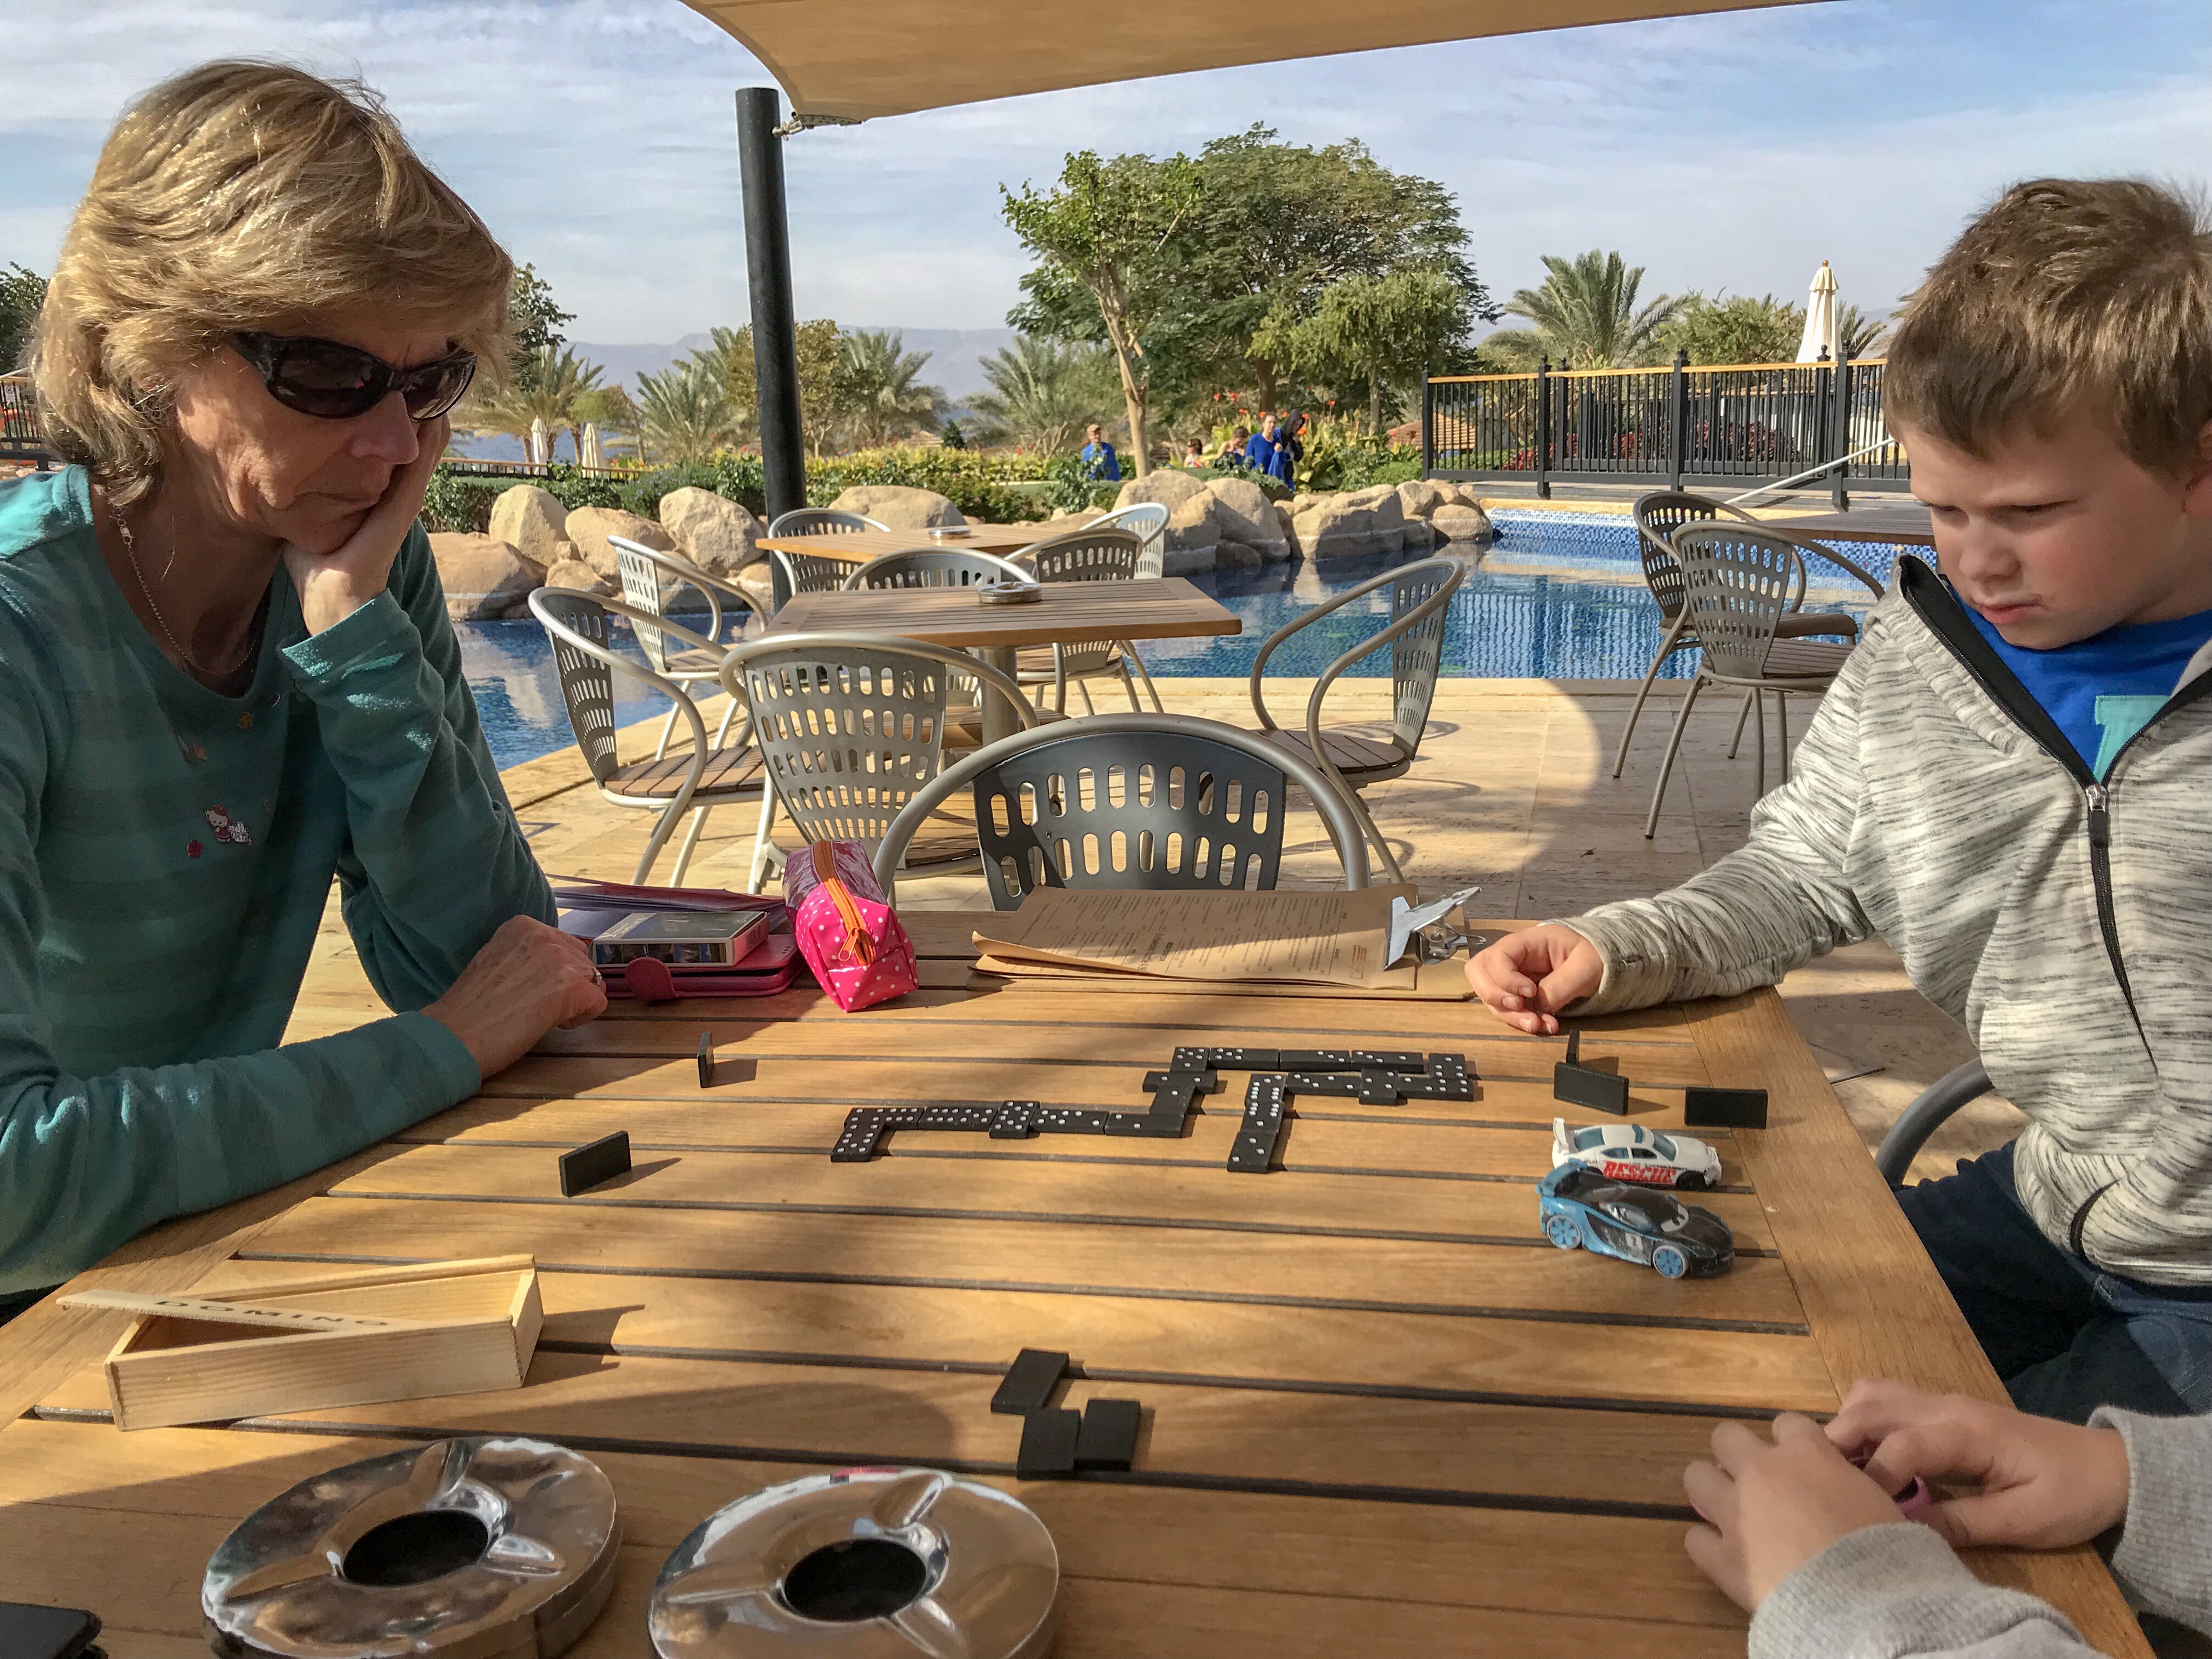 Granny Wanderlust playing dominoes with the Things by the pool in Aqaba